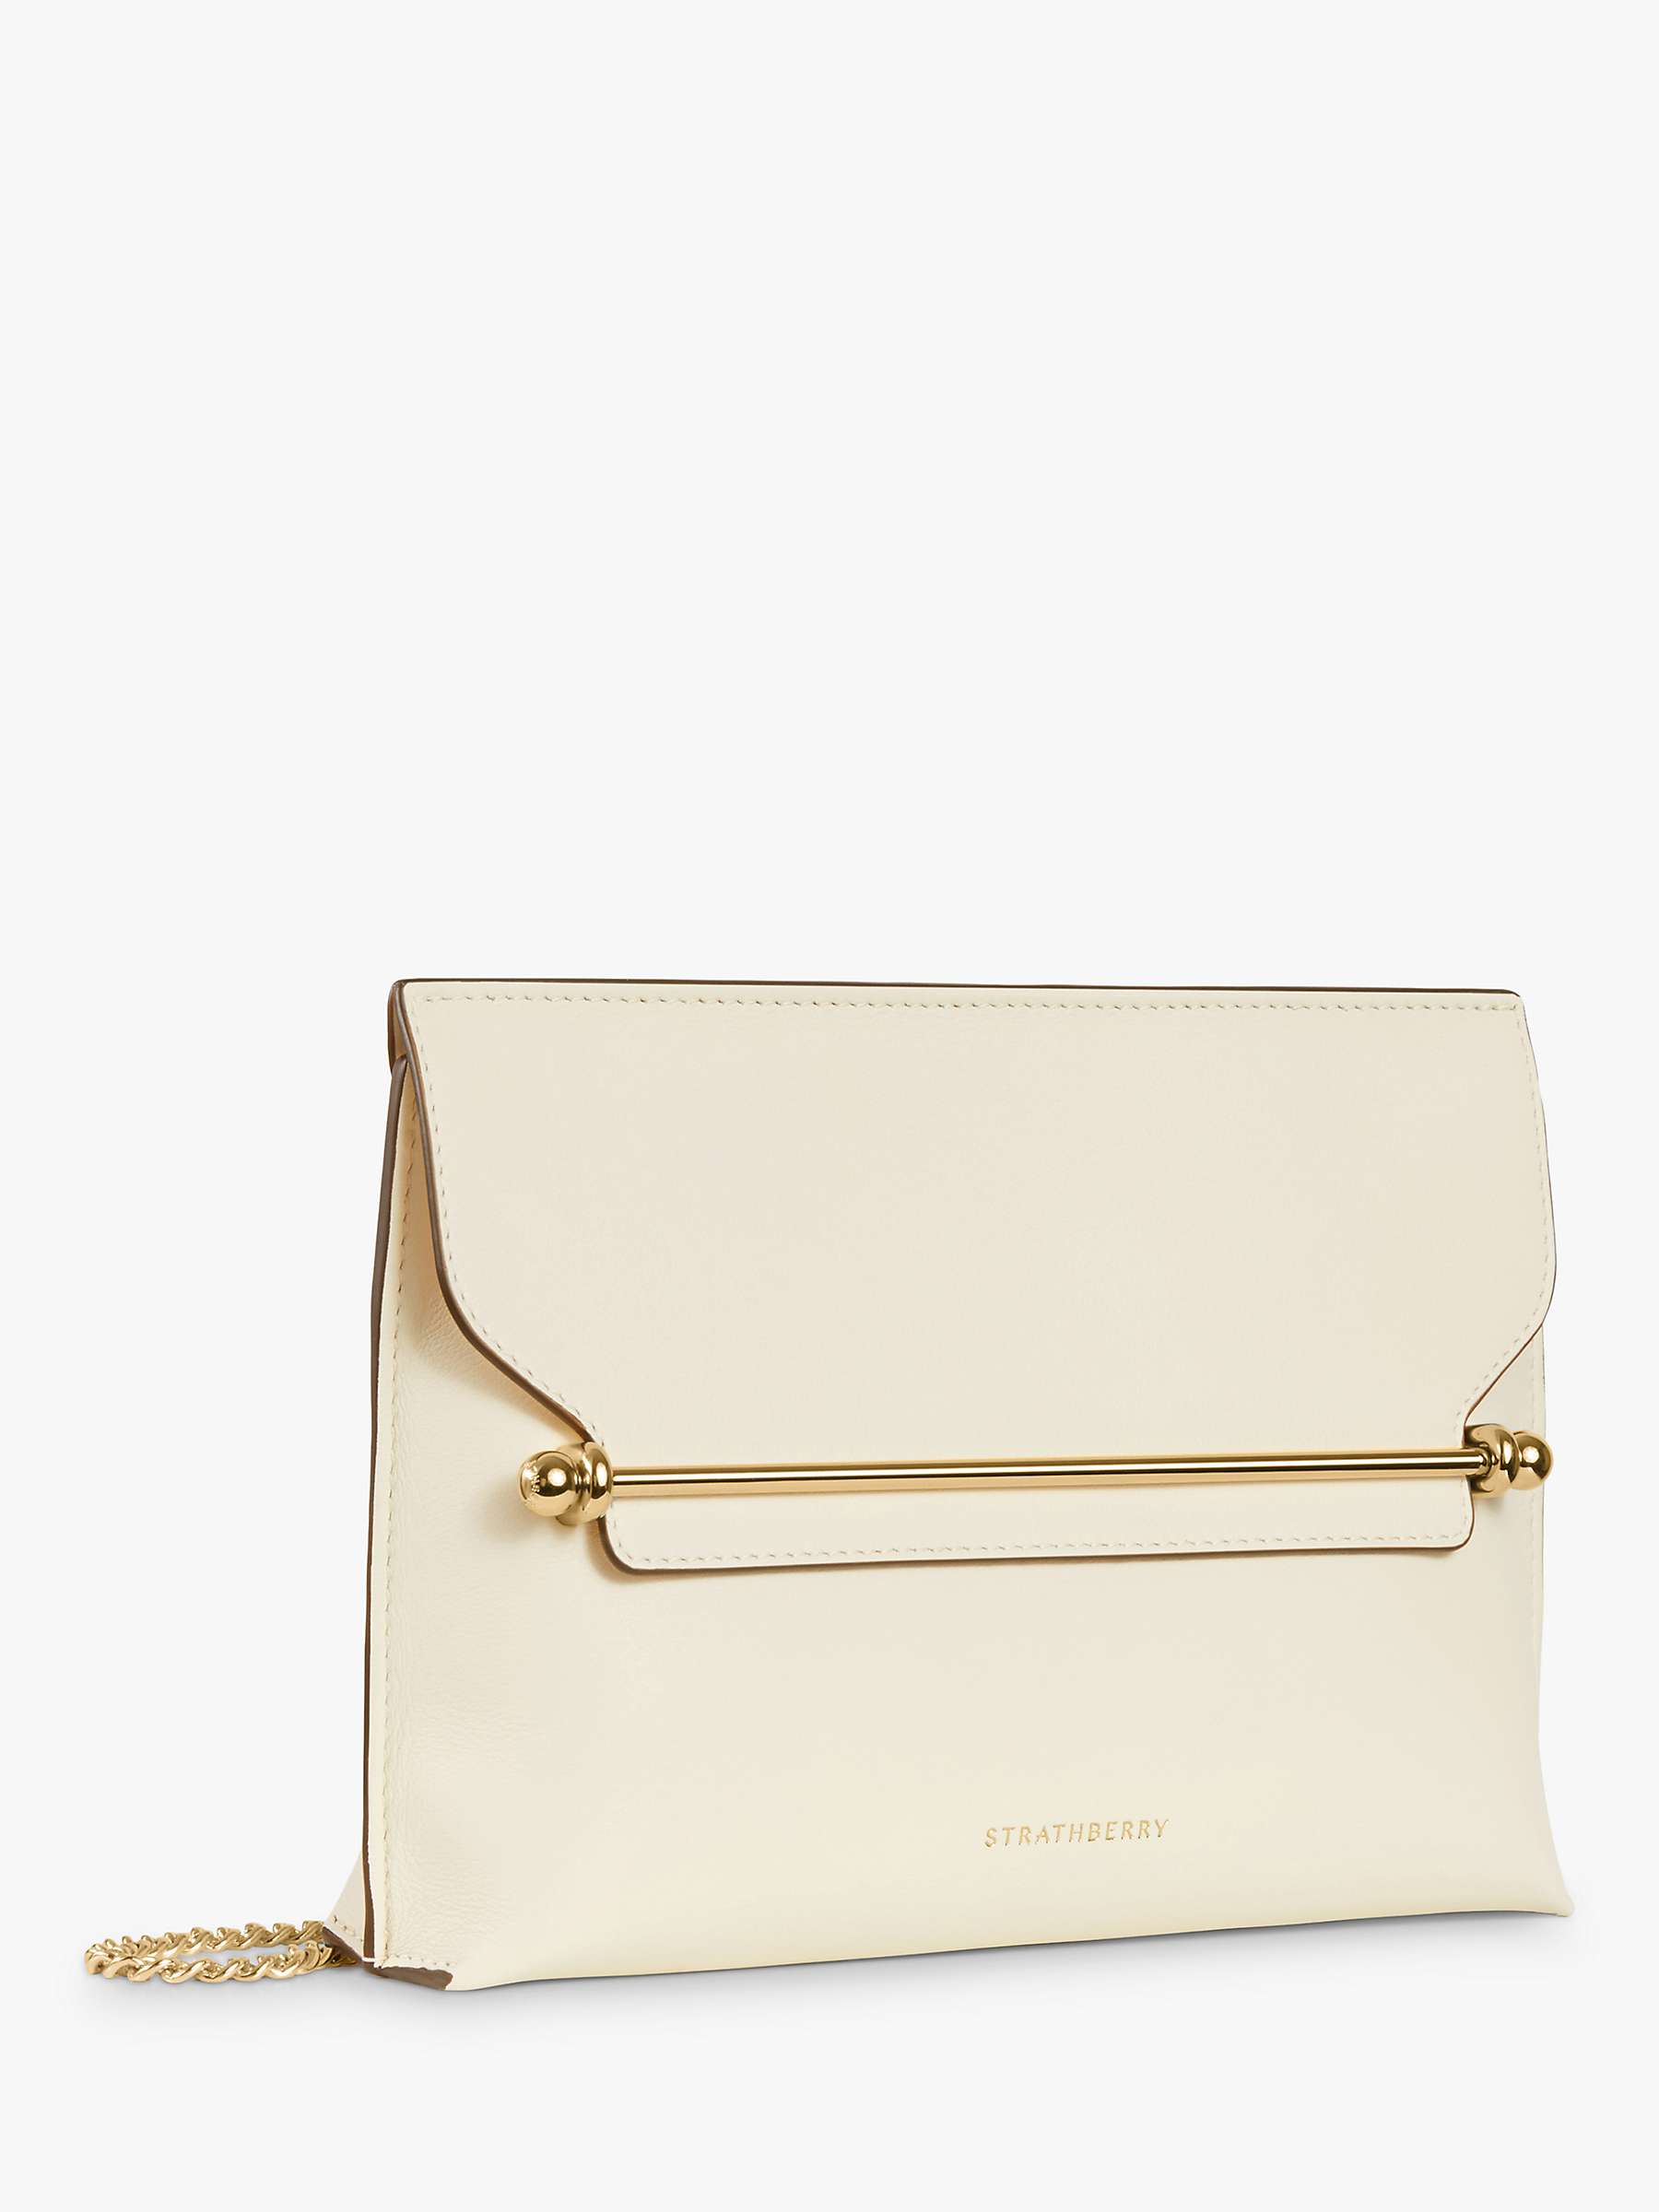 Strathberry Stylist Leather Clutch Bag, Vanilla at John Lewis & Partners